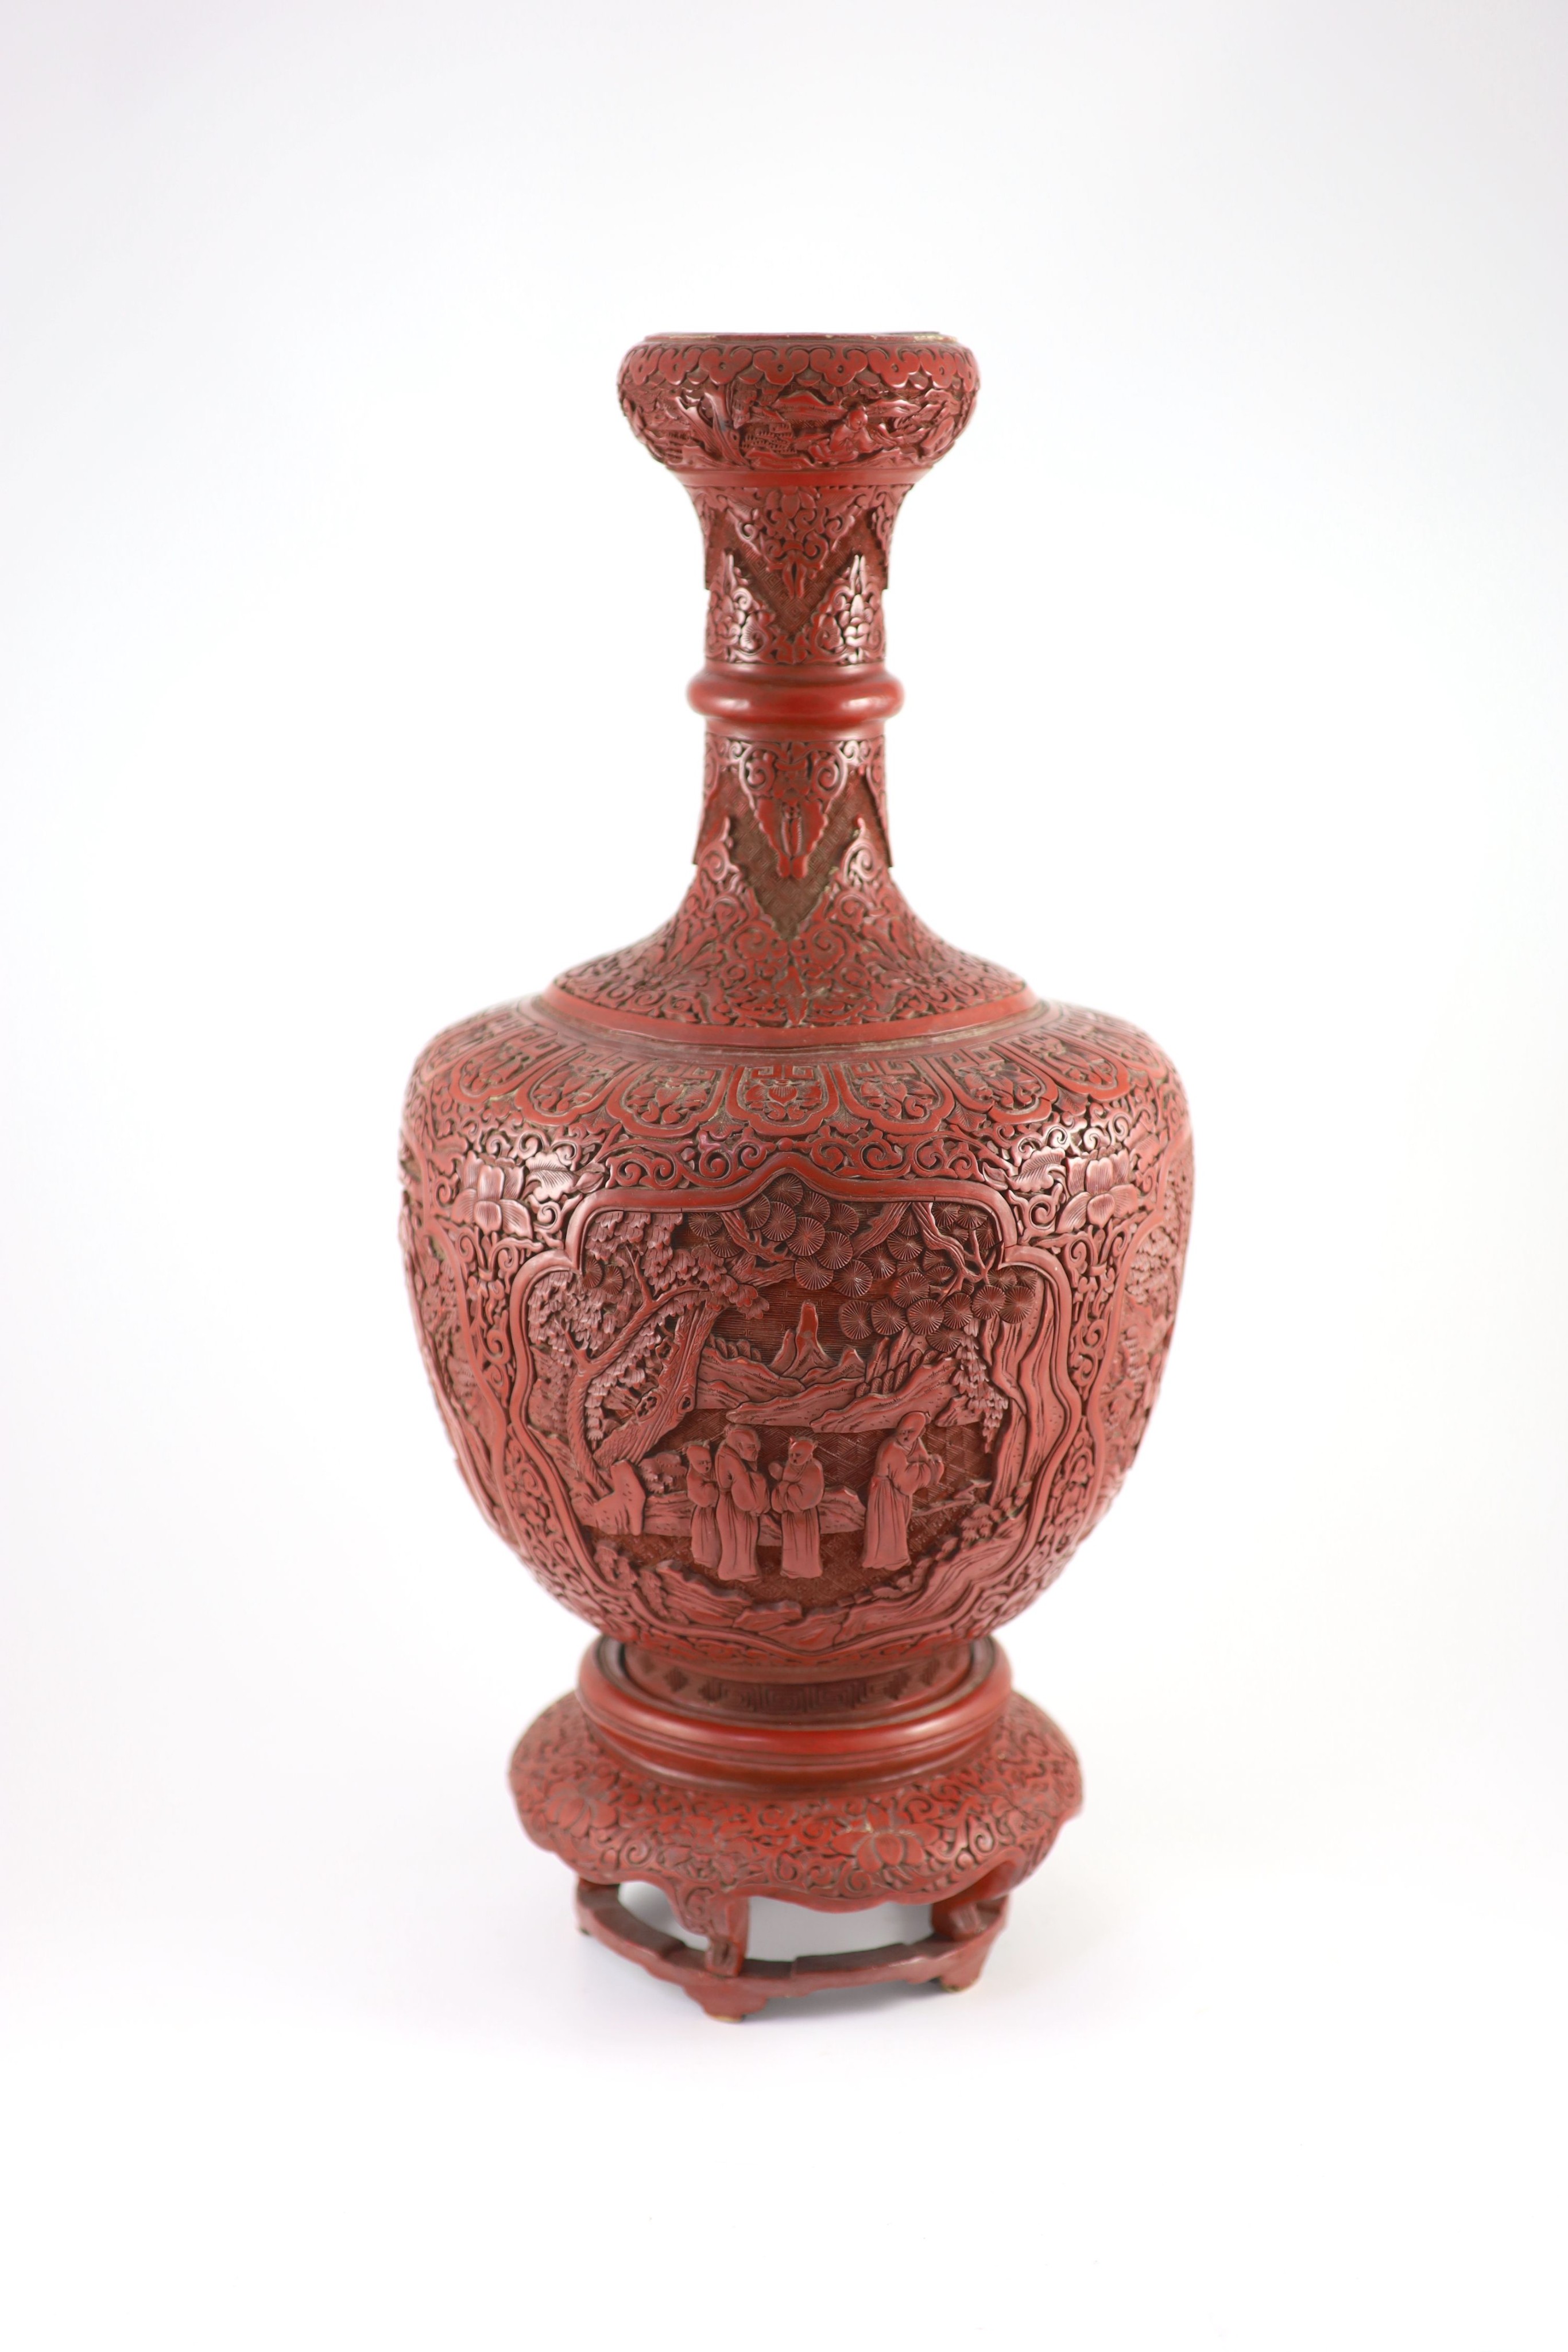 A large Chinese cinnabar lacquer garlic-neck vase and stand, c.1900, Total height 60.5 cm, base of vase drilled